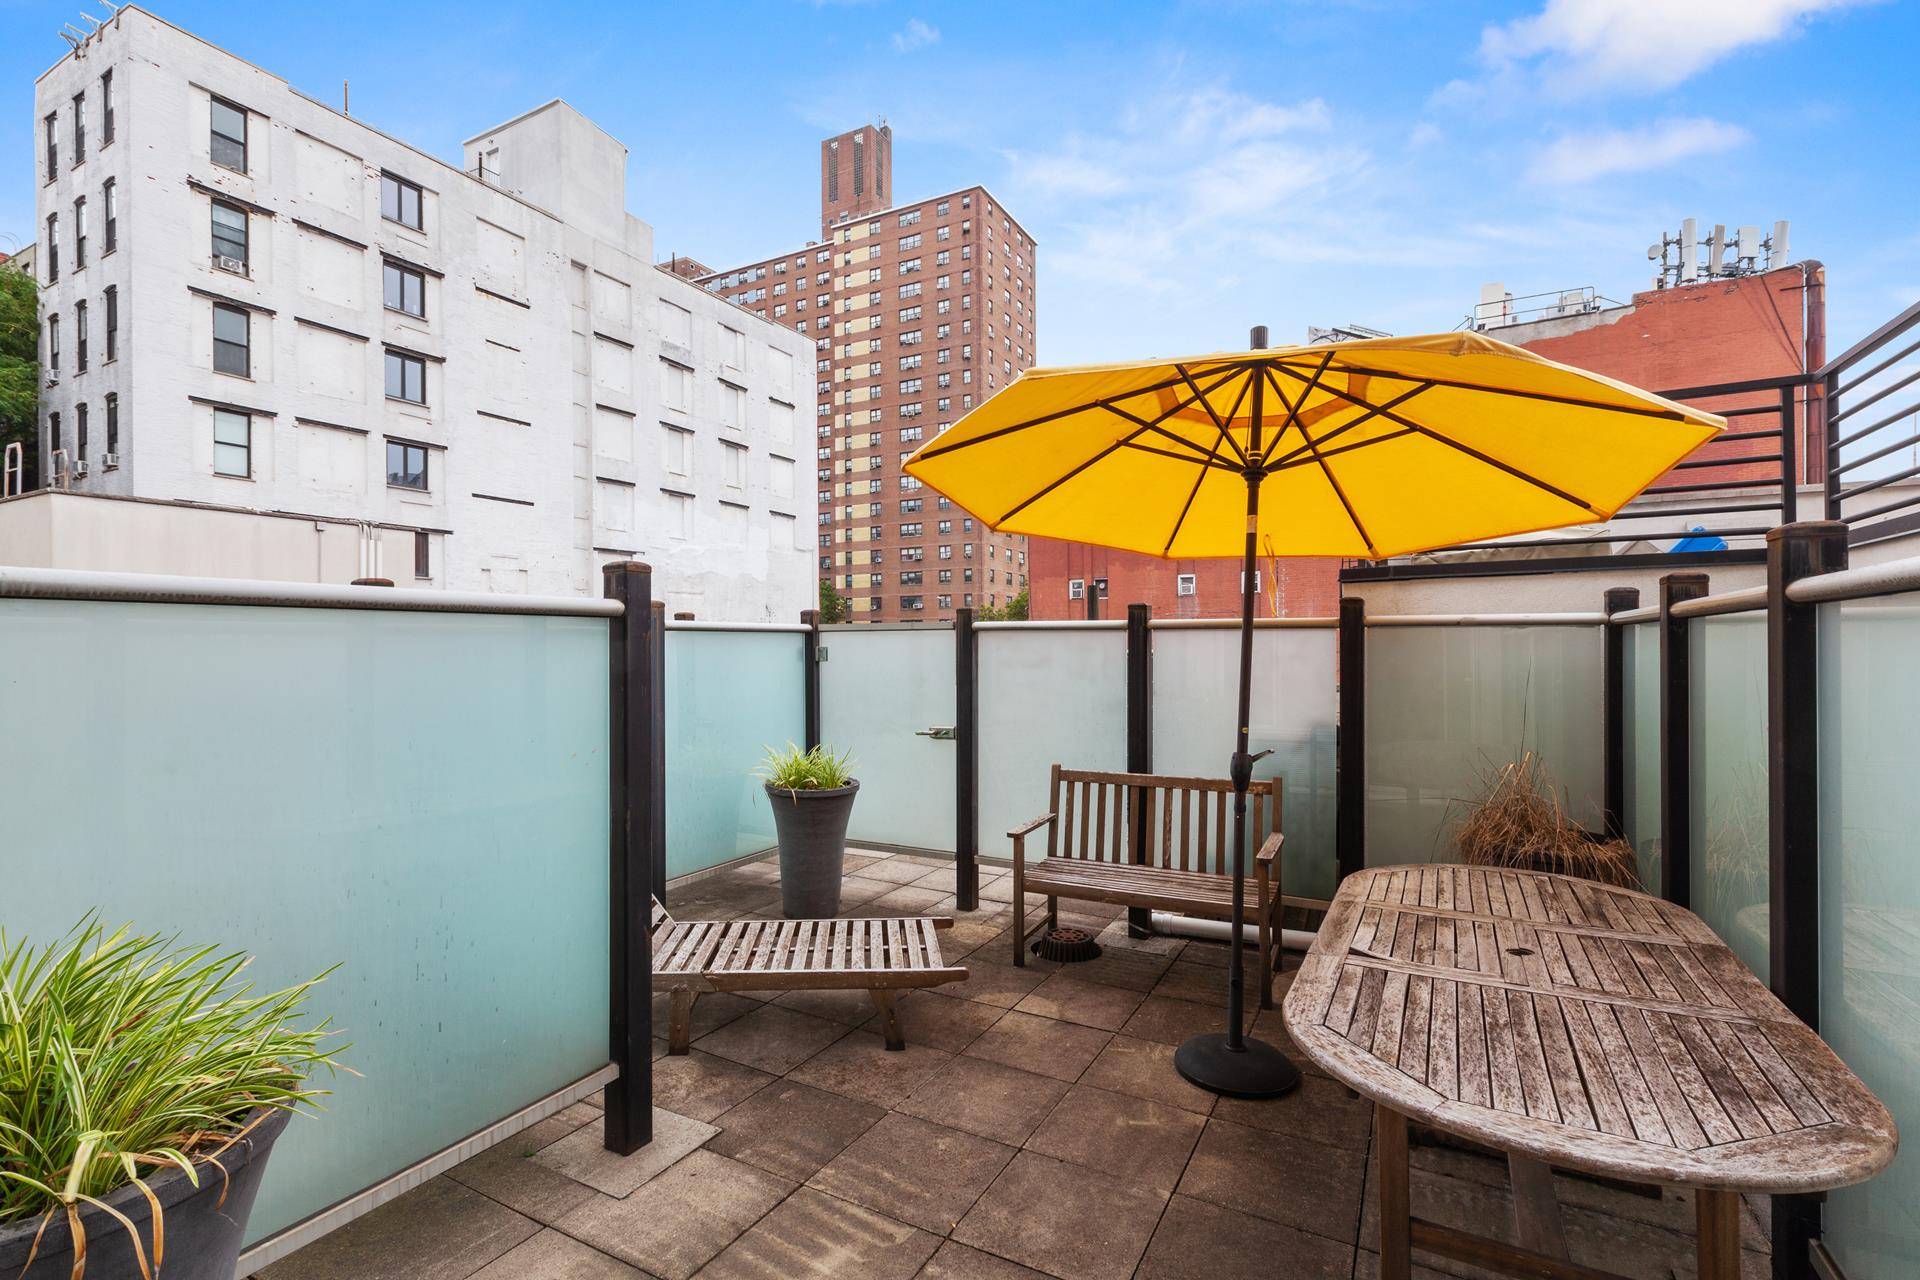 Introducing 78 Ridge Street 2E an immaculate 1 BR with a home office den as well as a massive private terrace !